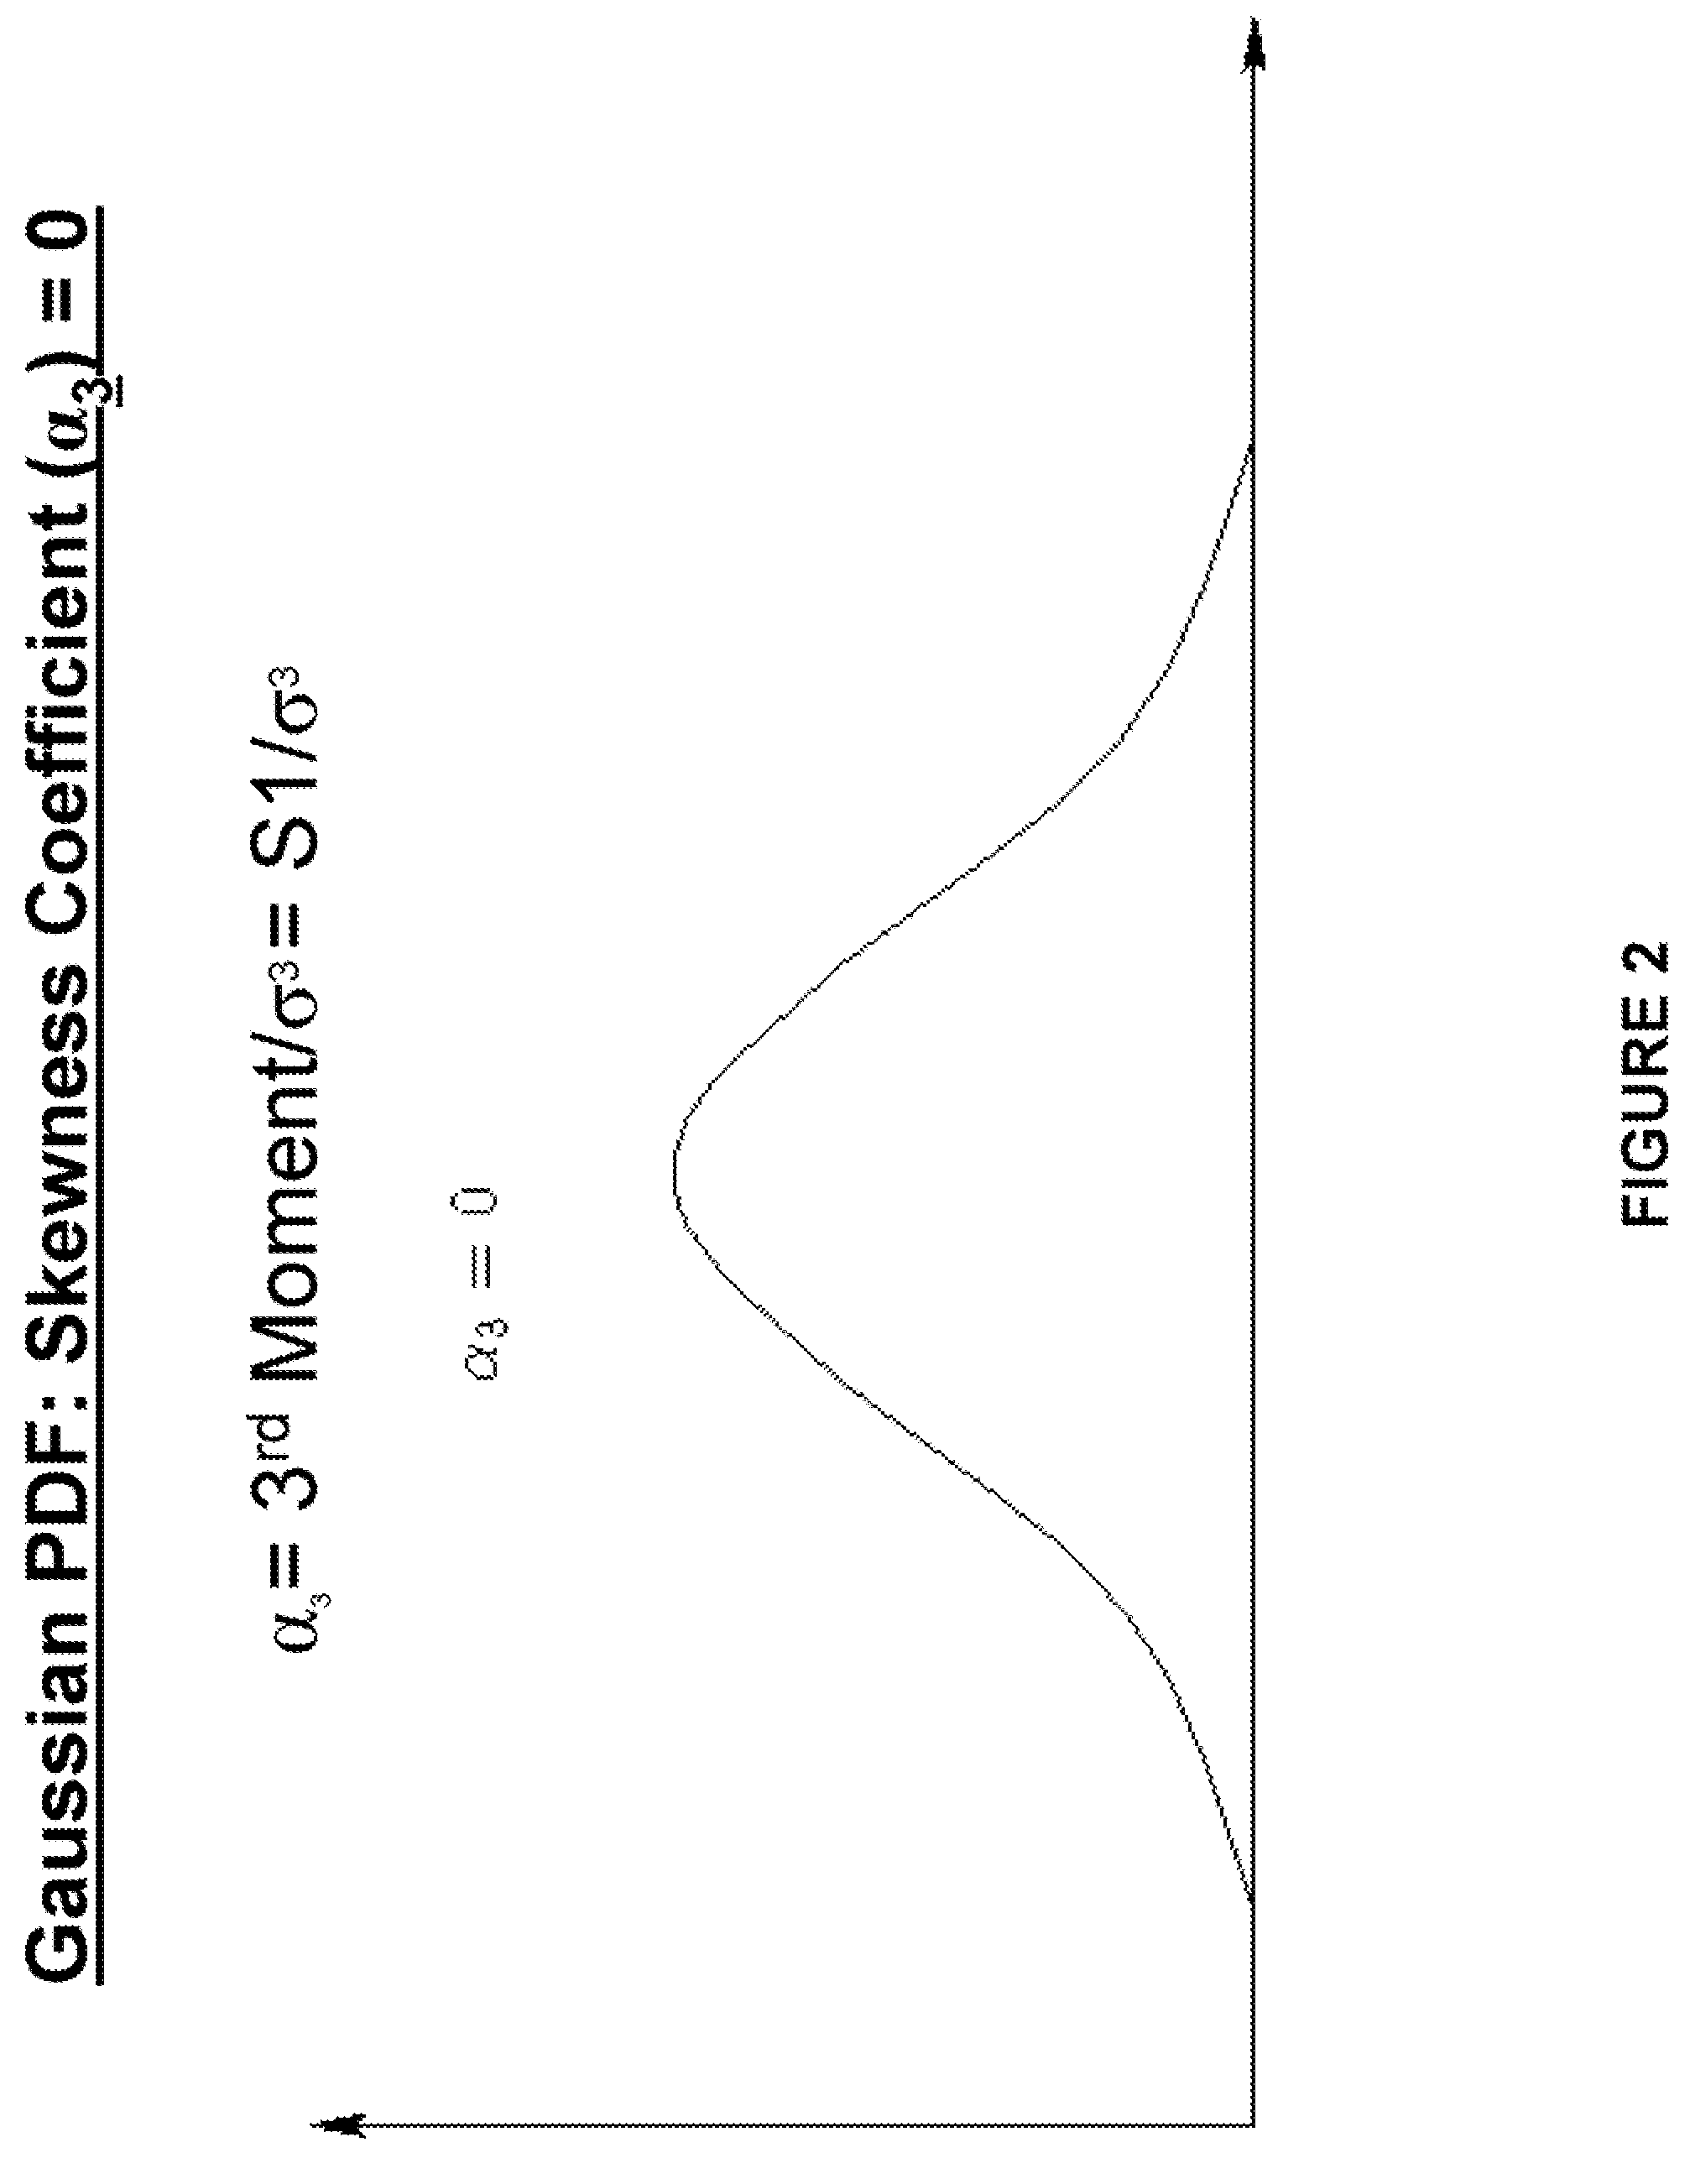 Probabilistic stress wave analysis system and method